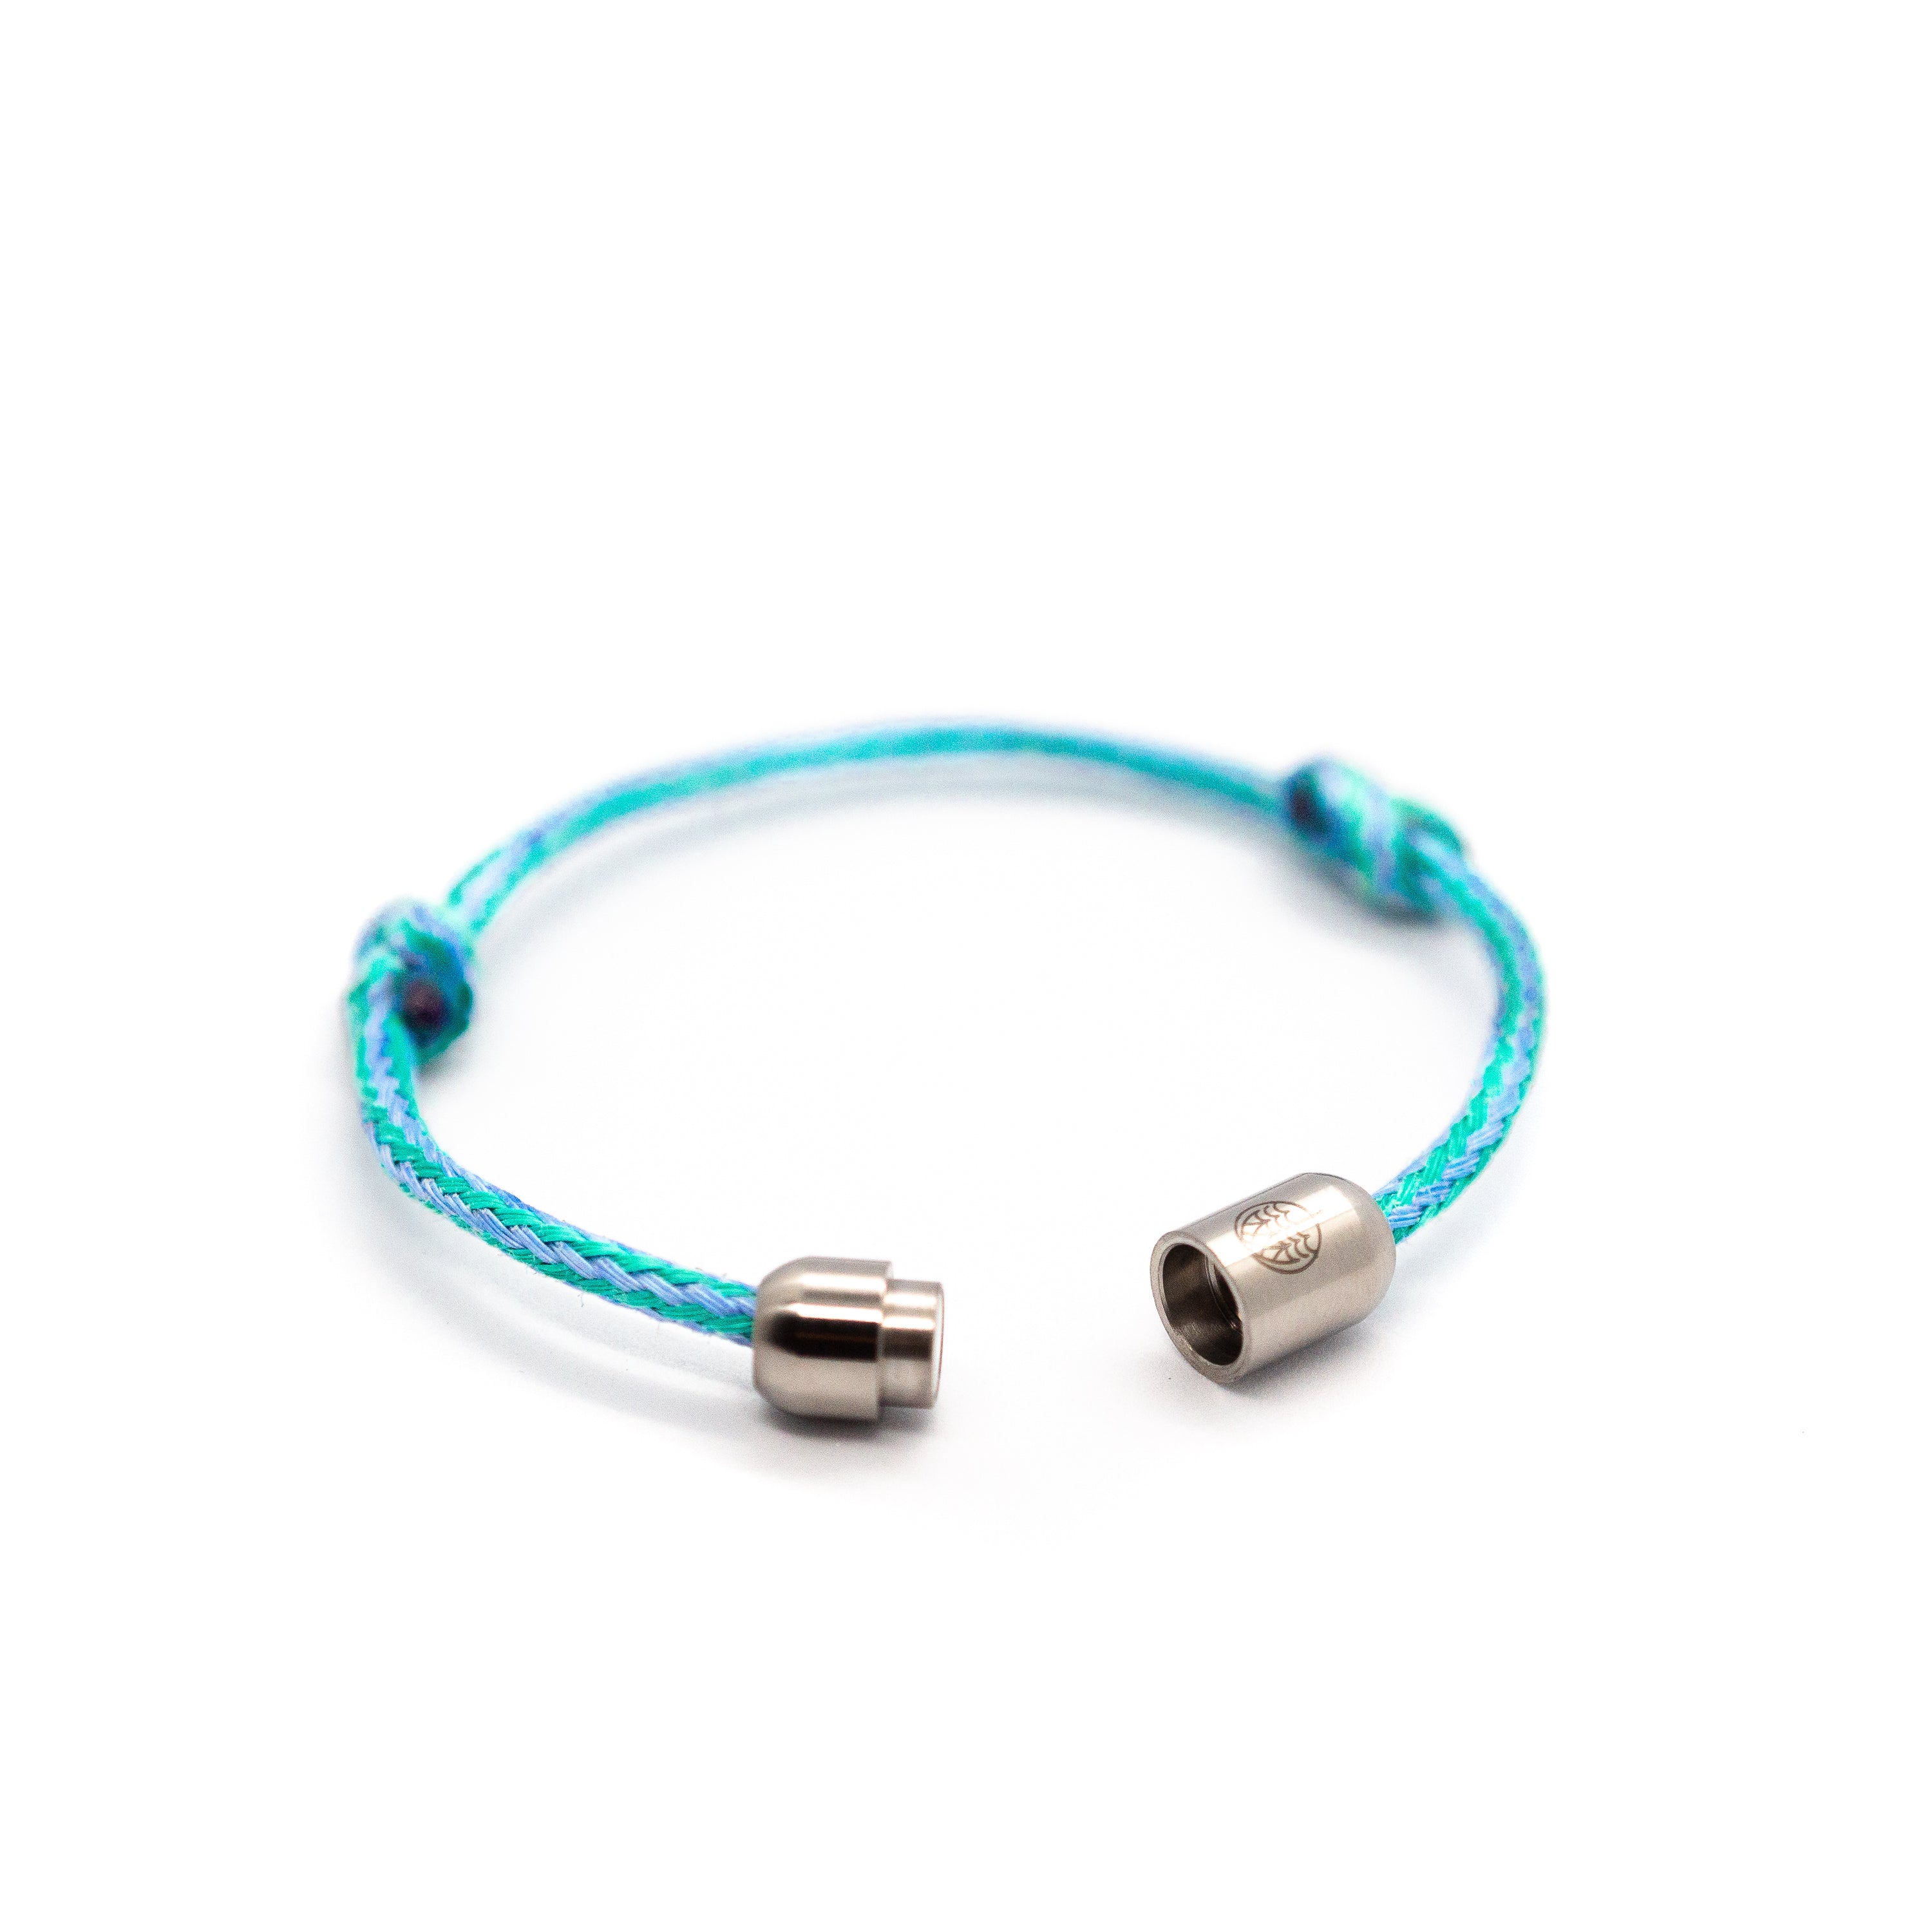 Bracenet in color aqua wit light blue high lights with a silver clasp